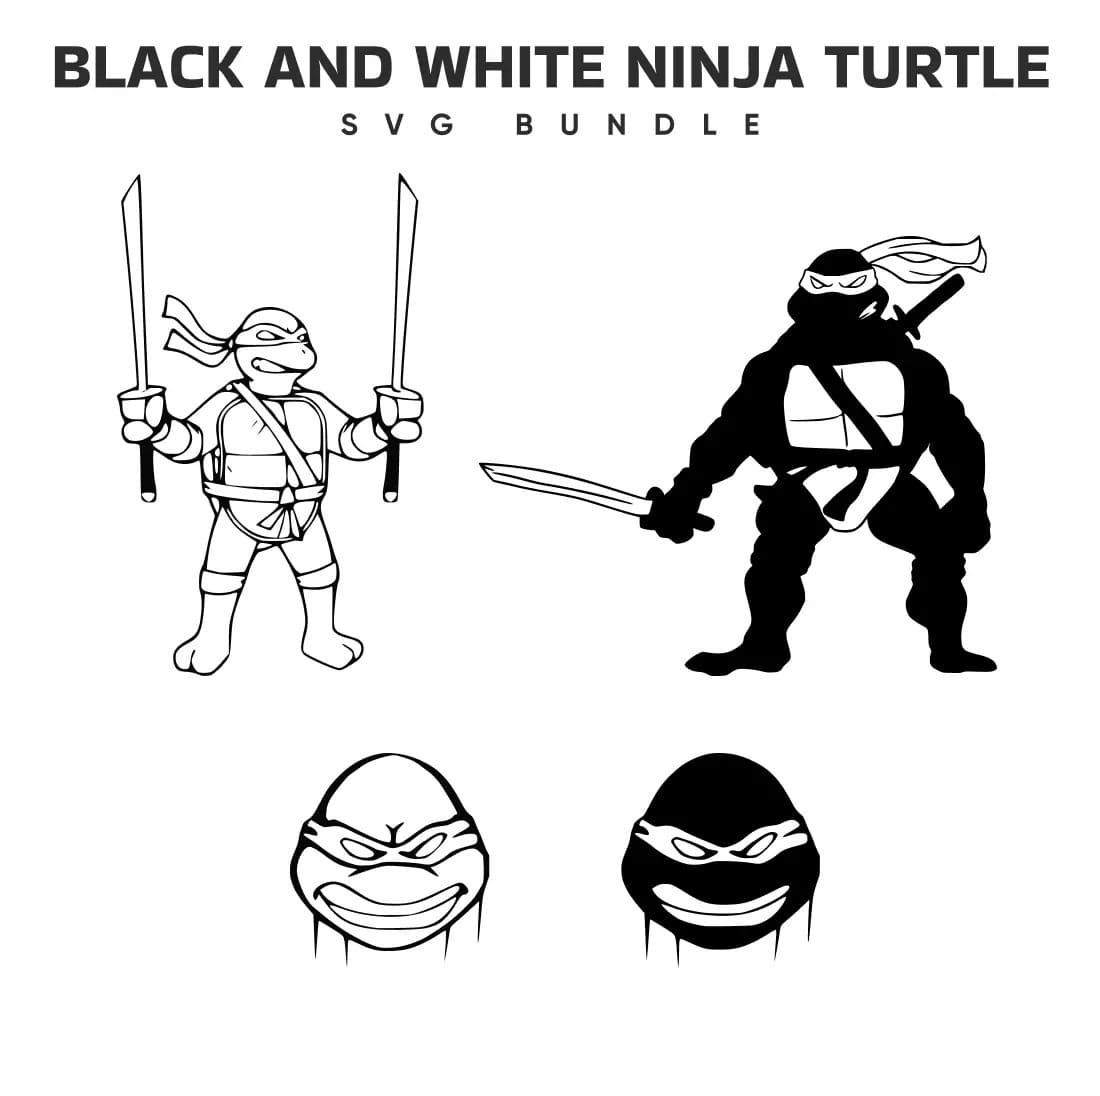 Black and white ninja turtle coloring page.